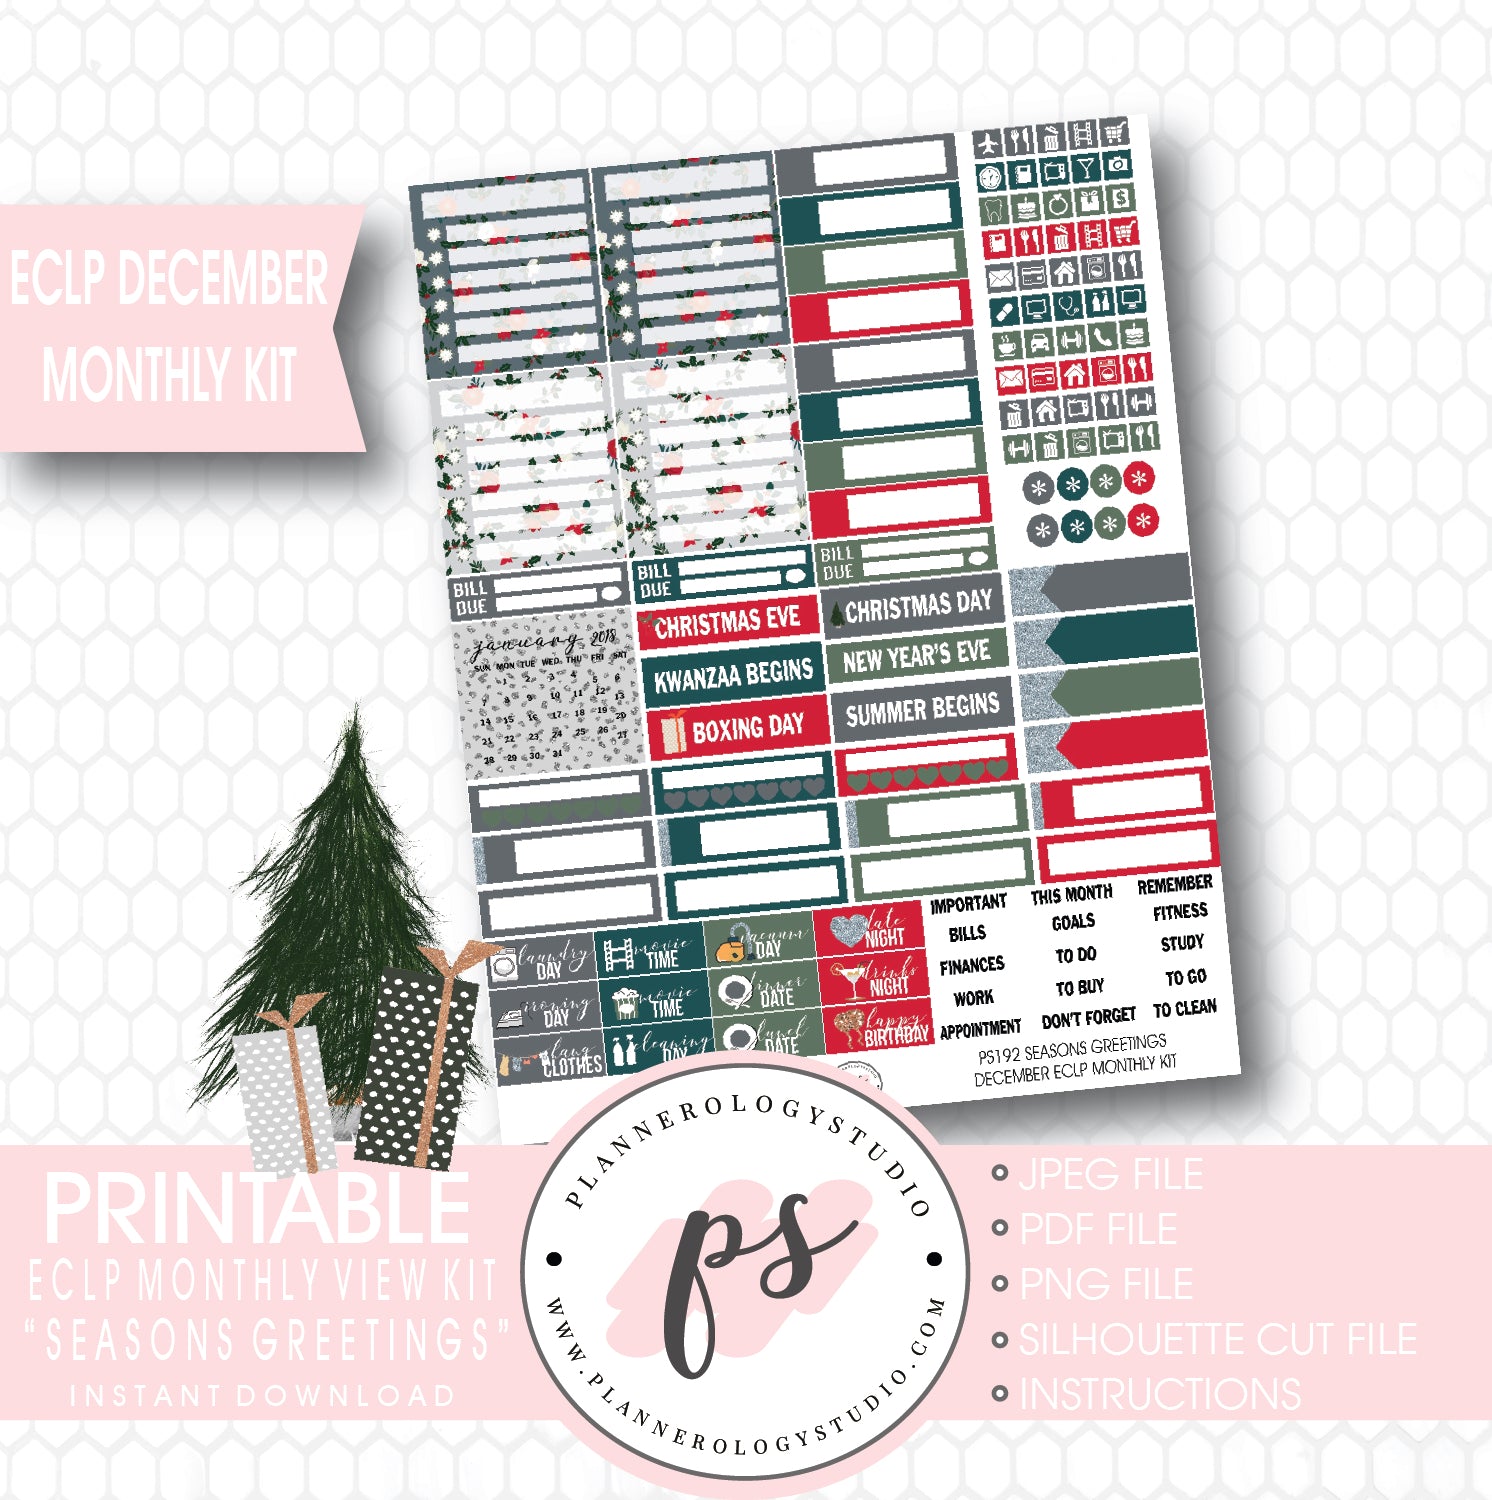 Seasons Greetings Christmas December 2017 Monthly View Kit Printable Planner Stickers (for use with ECLP) - Plannerologystudio